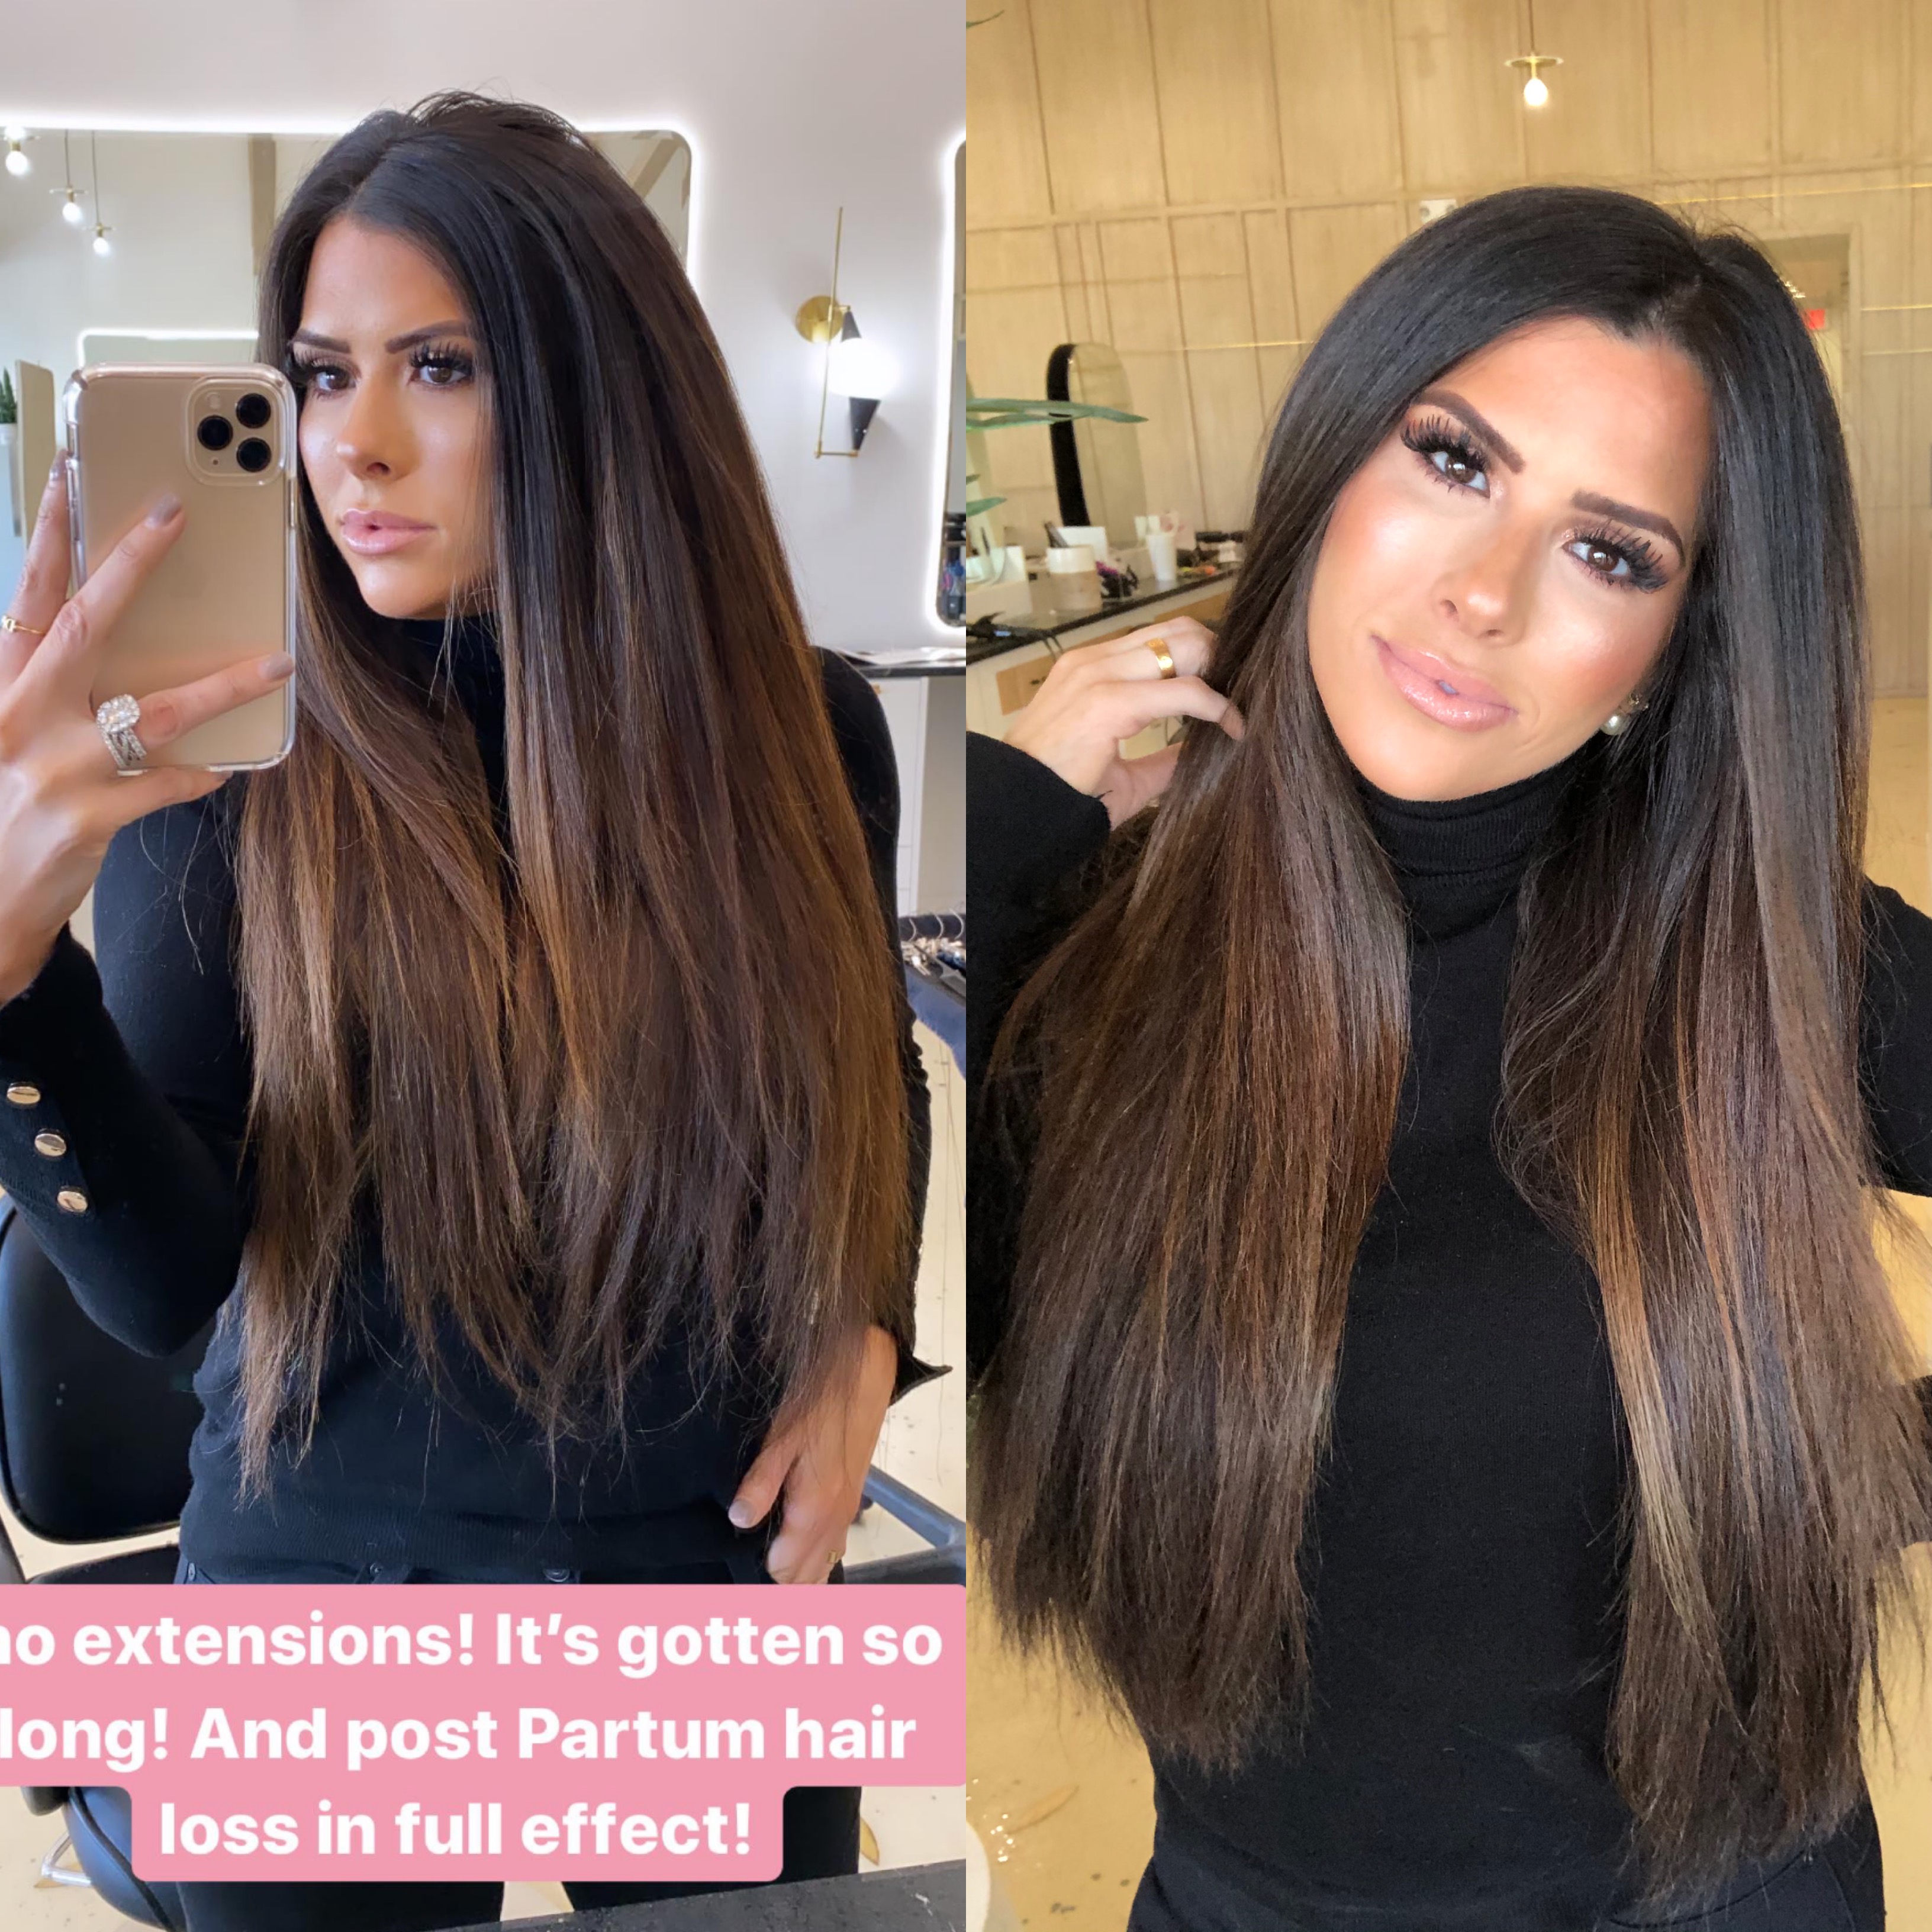 before and after hair extensions hair by chrissy ,emily gemma | BEST HAIR PRODUCTS FOR 2019💁🏻‍♀️ || PART 1 by popular US beauty blog, The Sweetest Thing: image of a woman with brunette hair extensions. 